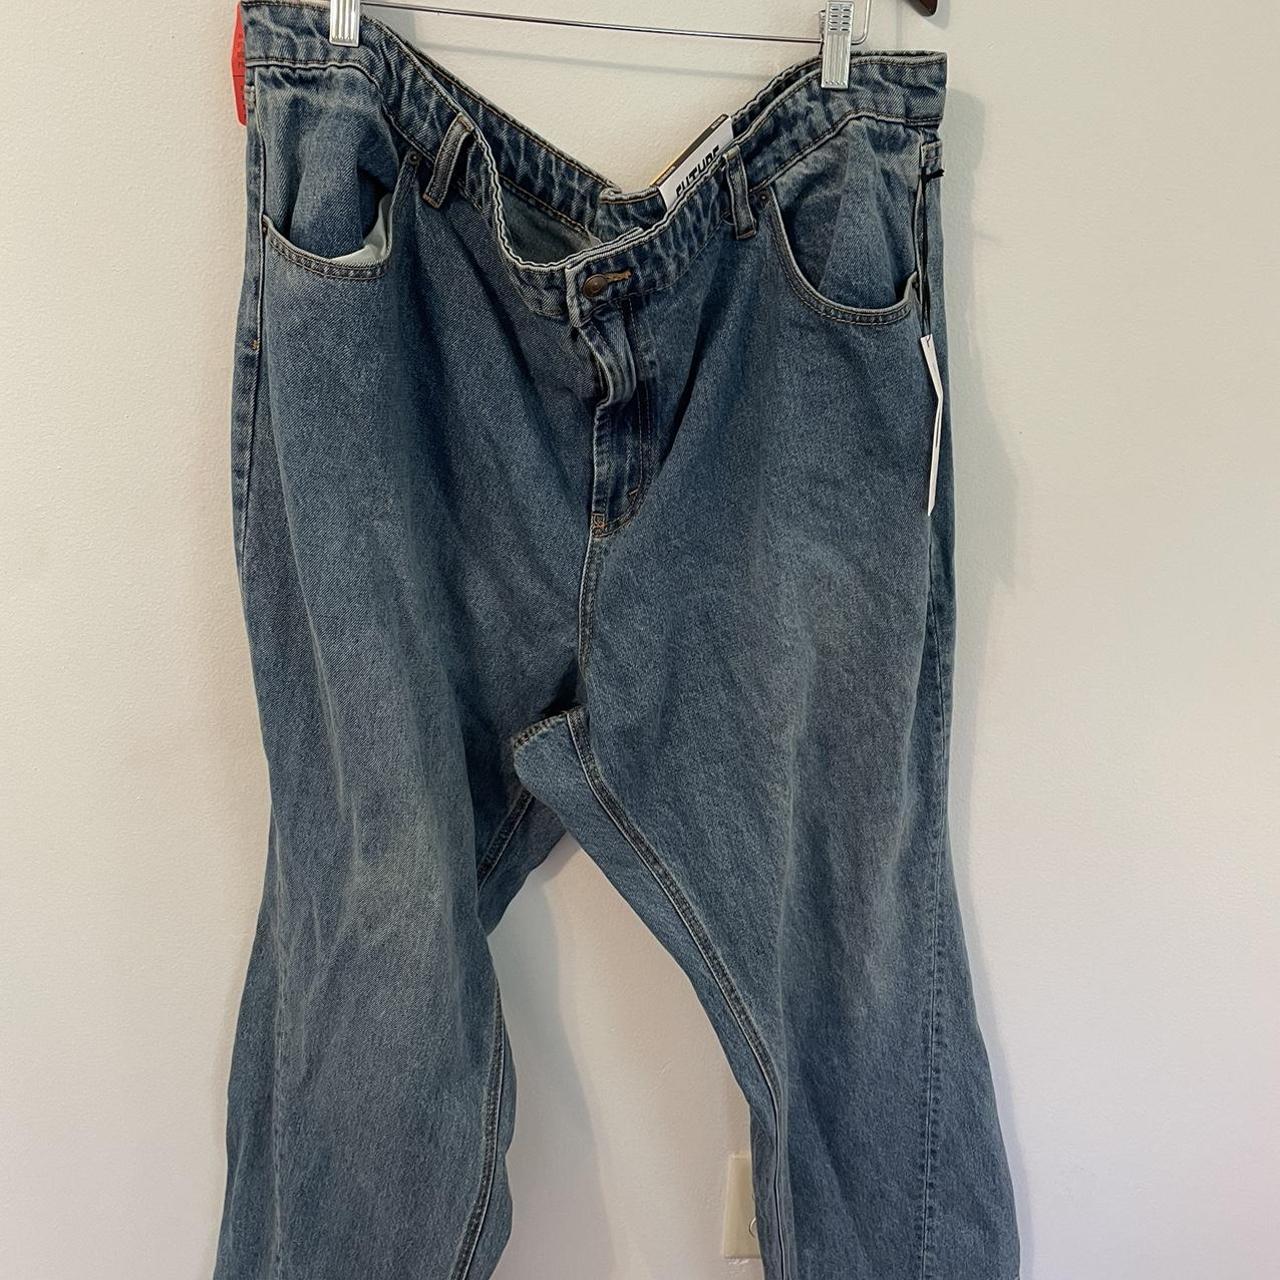 New with tags size 20/22 boyfriend jeans. These are... - Depop